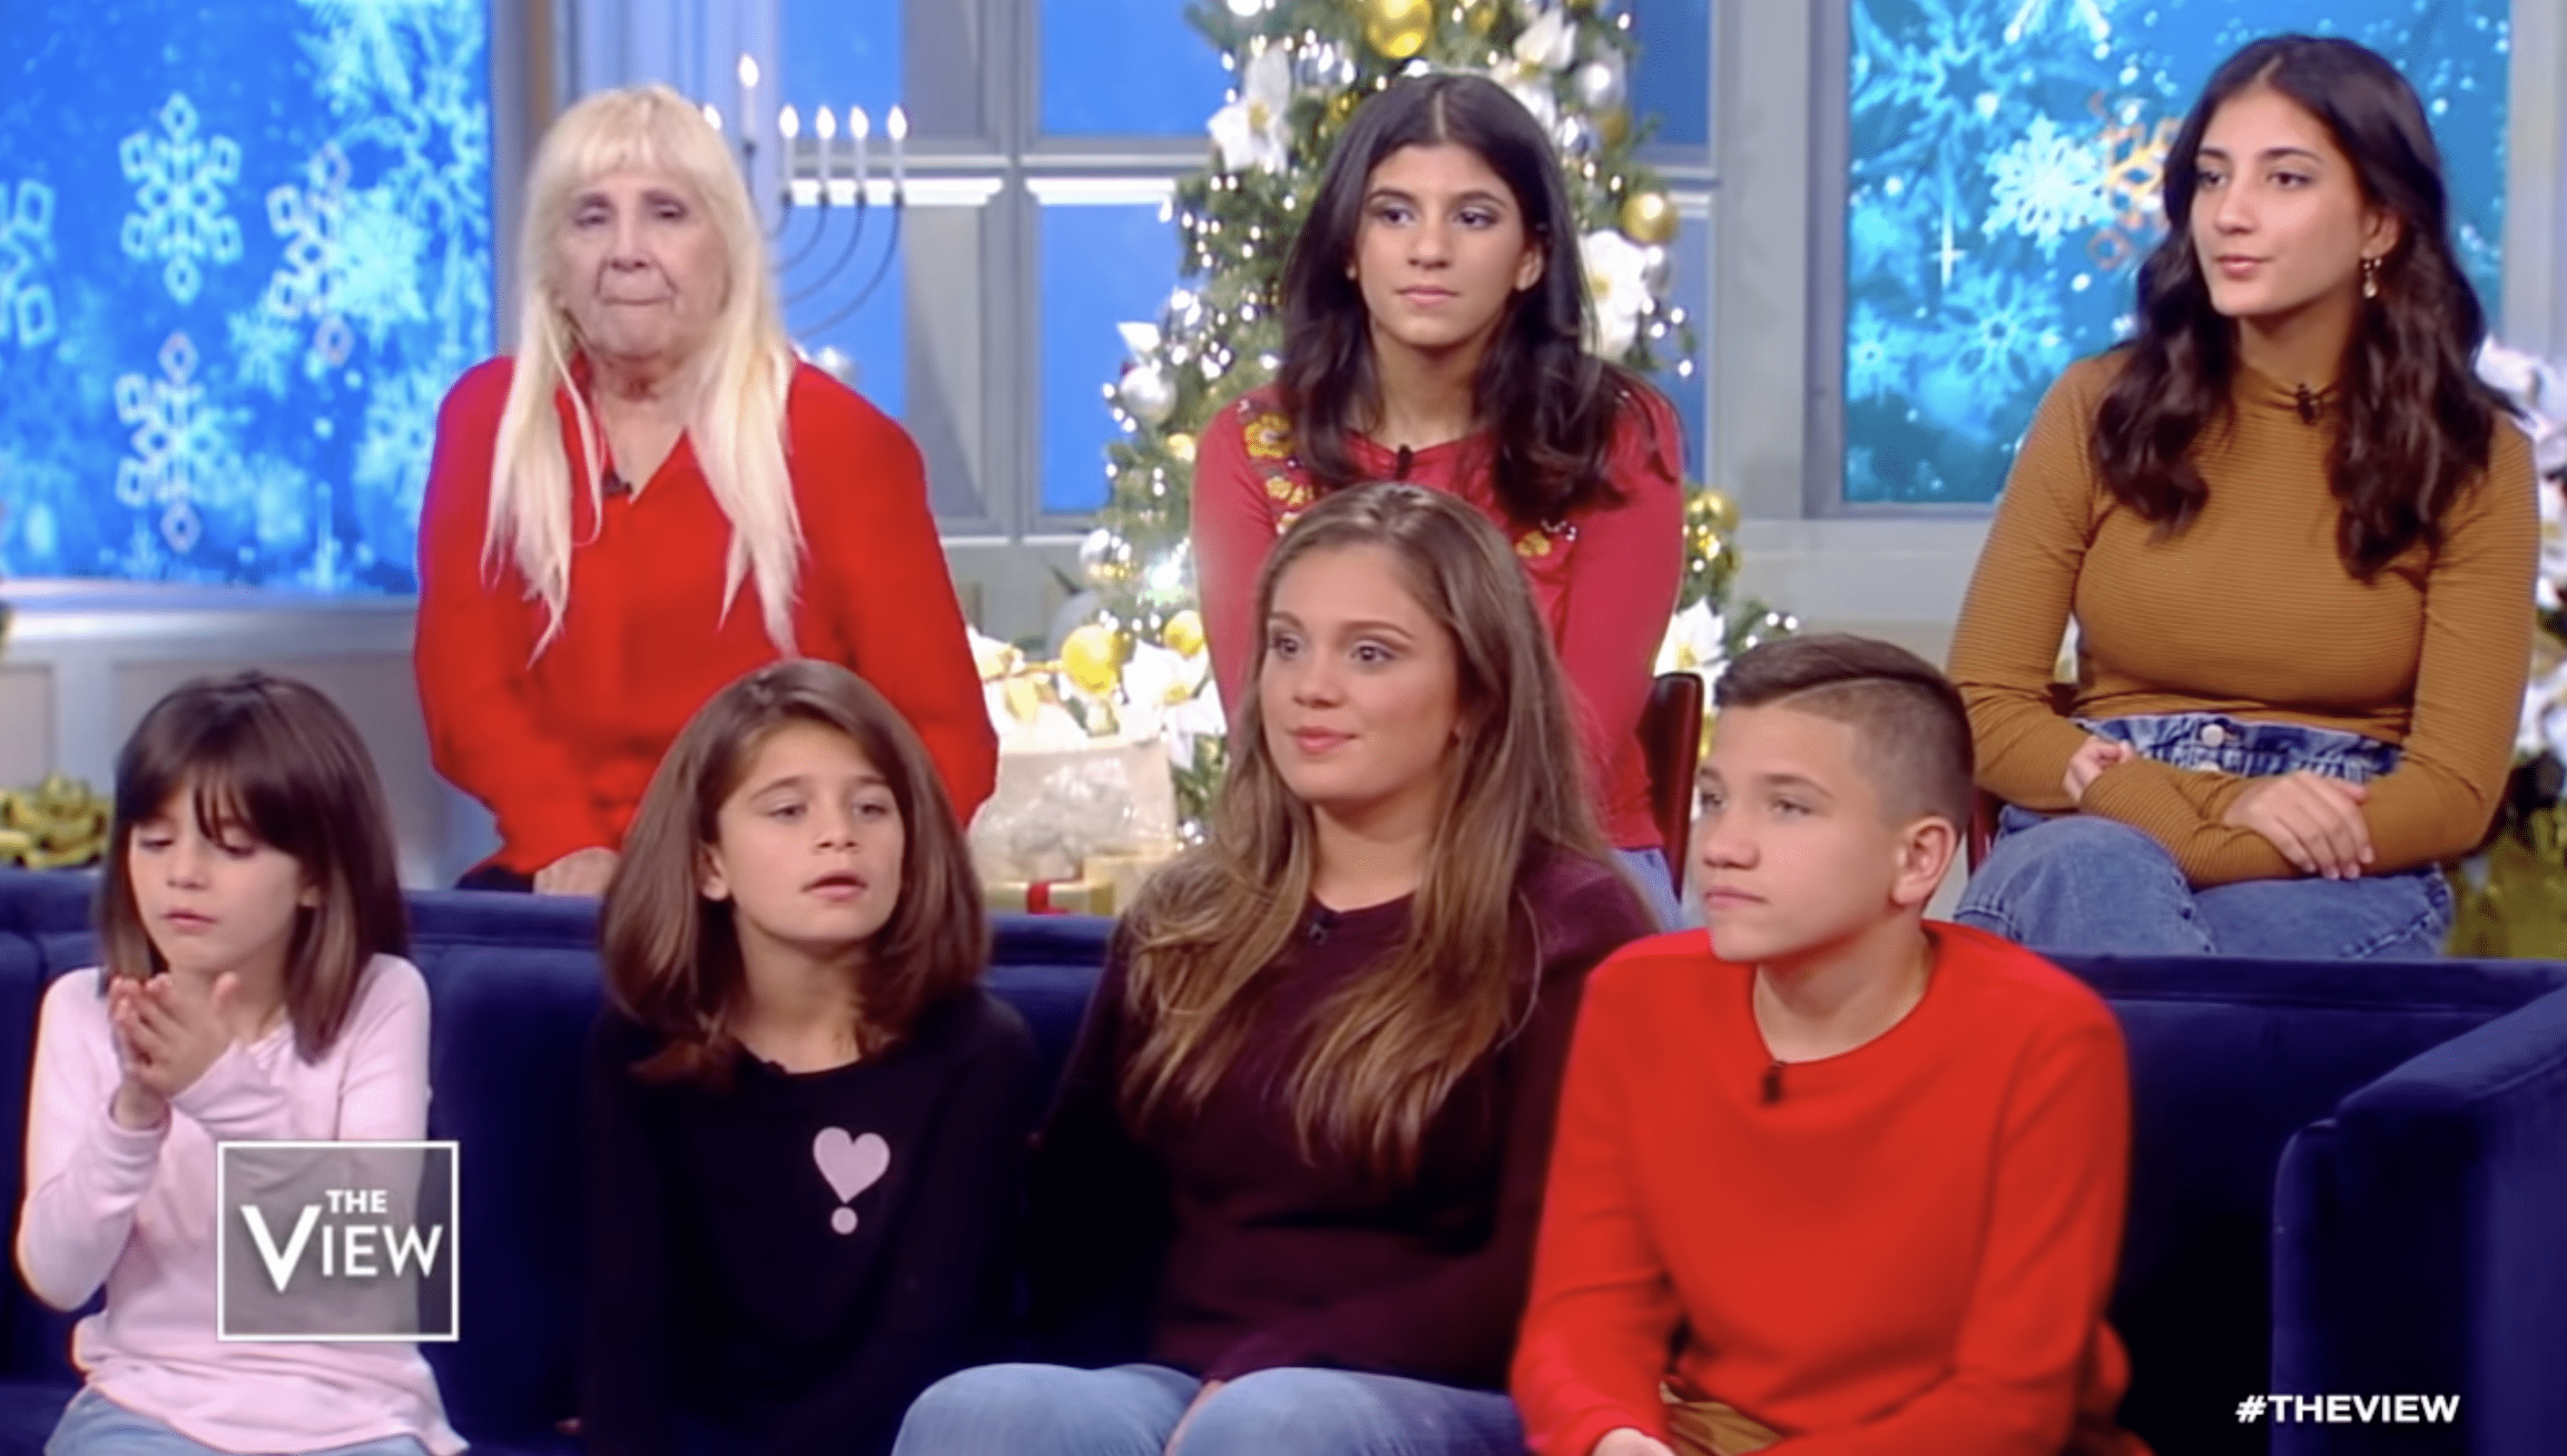 Samantha, her five younger siblings and their grandmother share their story with "The View." | Photo: YouTube.com/The View